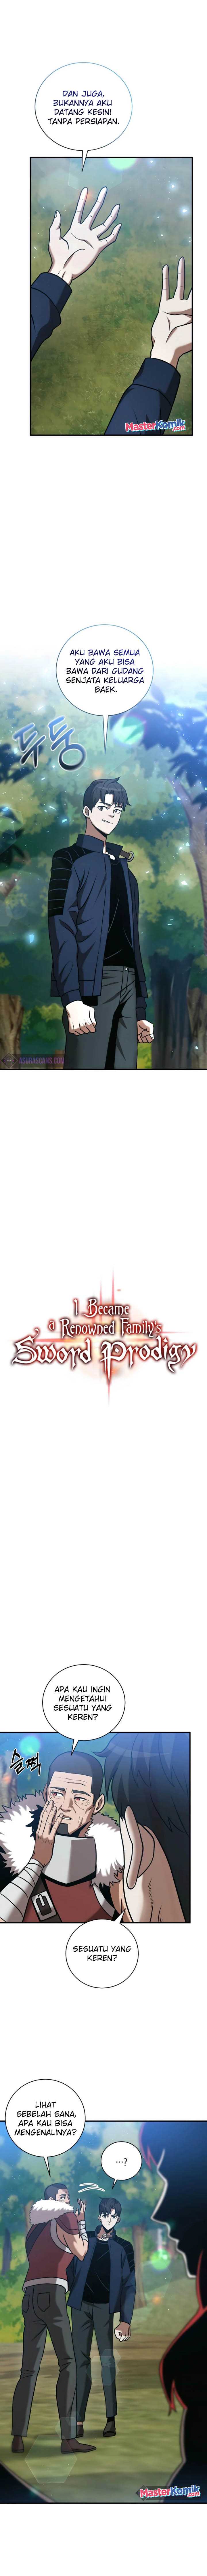 I Became a Renowned Family’s Sword Prodigy Chapter 20